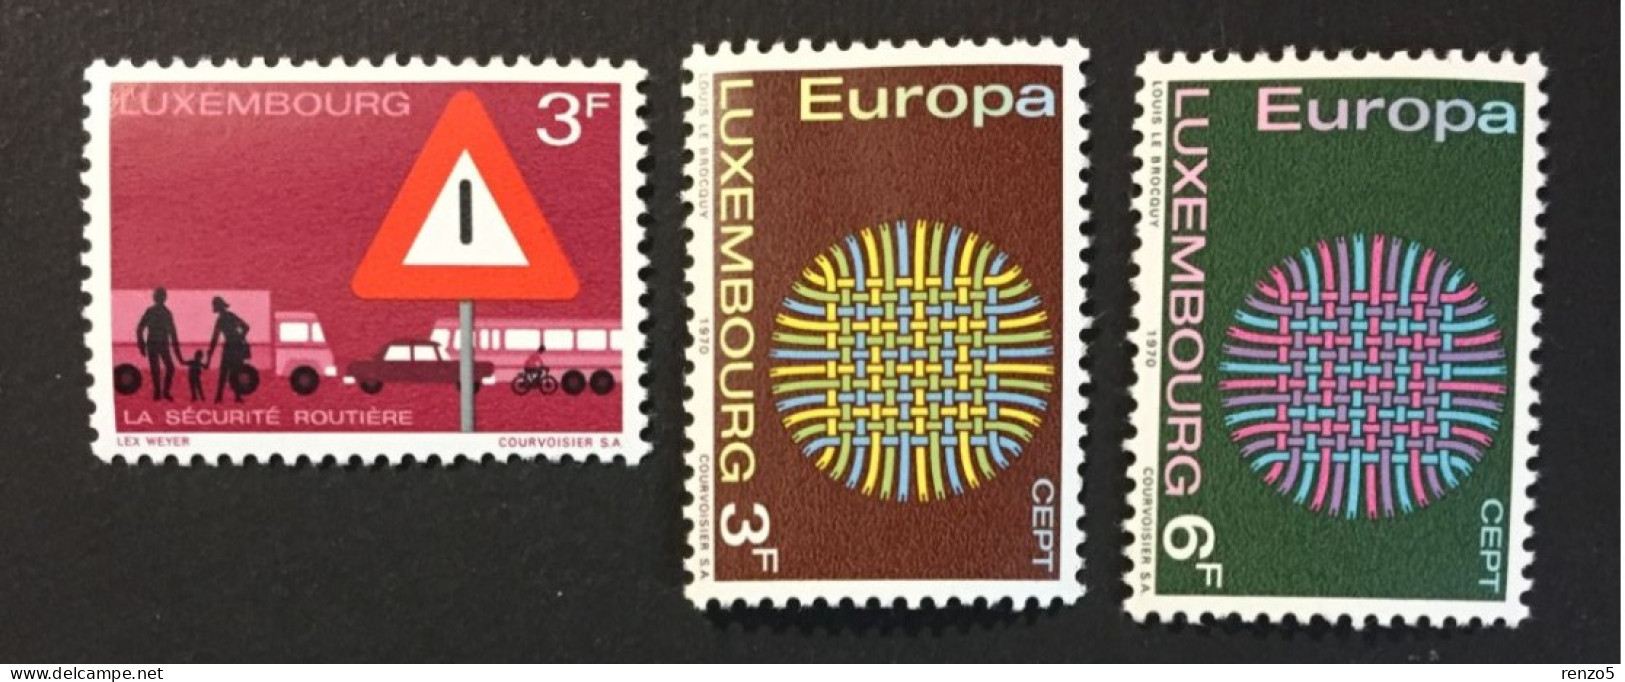 1970 Luxembourg -The Importance Of Traffic Safety, Europa CEPT - Unused - Ungebraucht